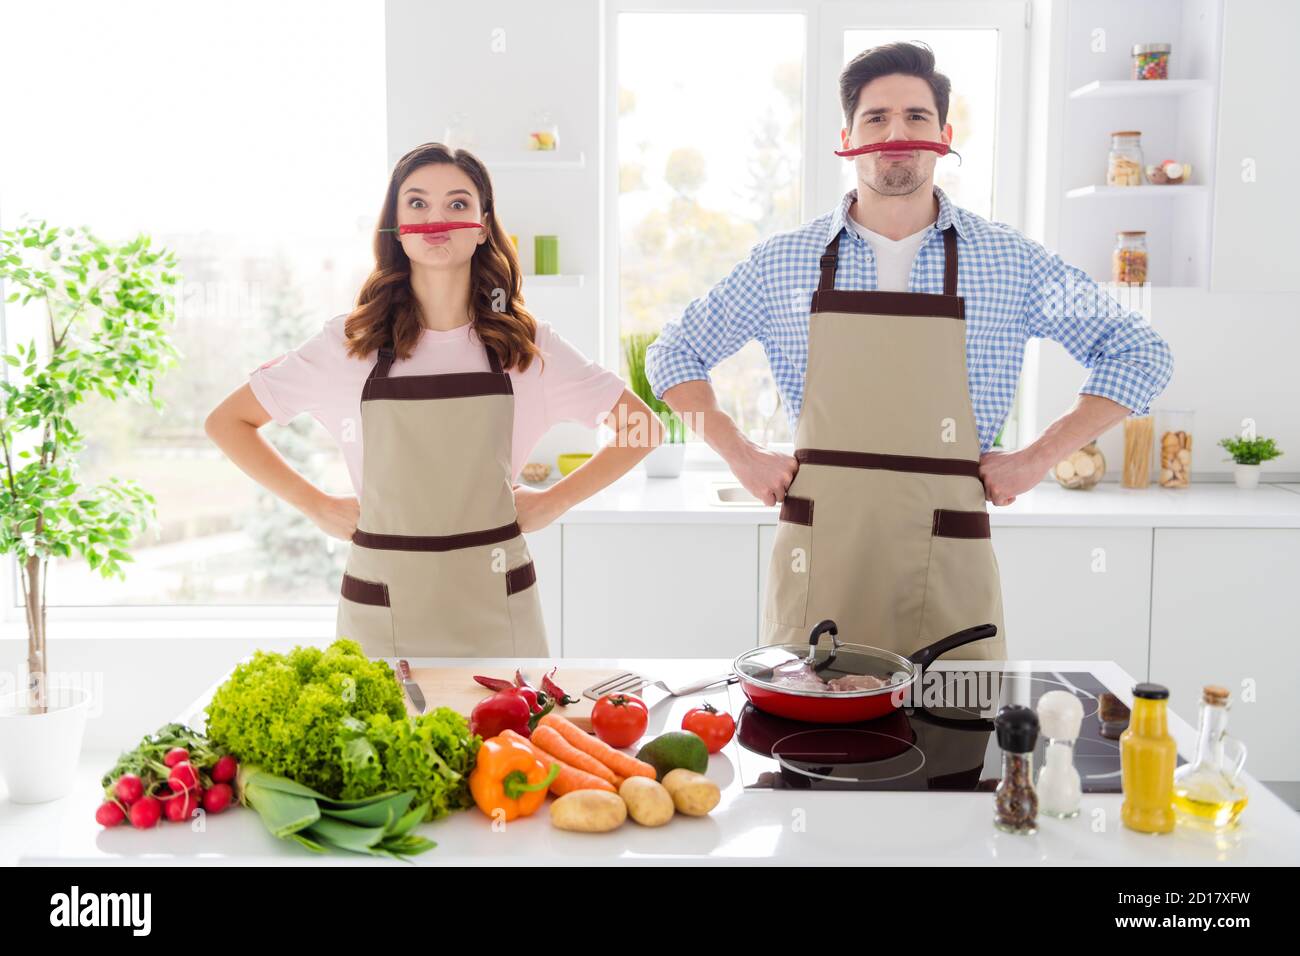 Two funny people enjoy hobby cooking have red hot chilli pepper nose imagine fake mustache comic humor joking prepare dinner in kitchen house indoors Stock Photo